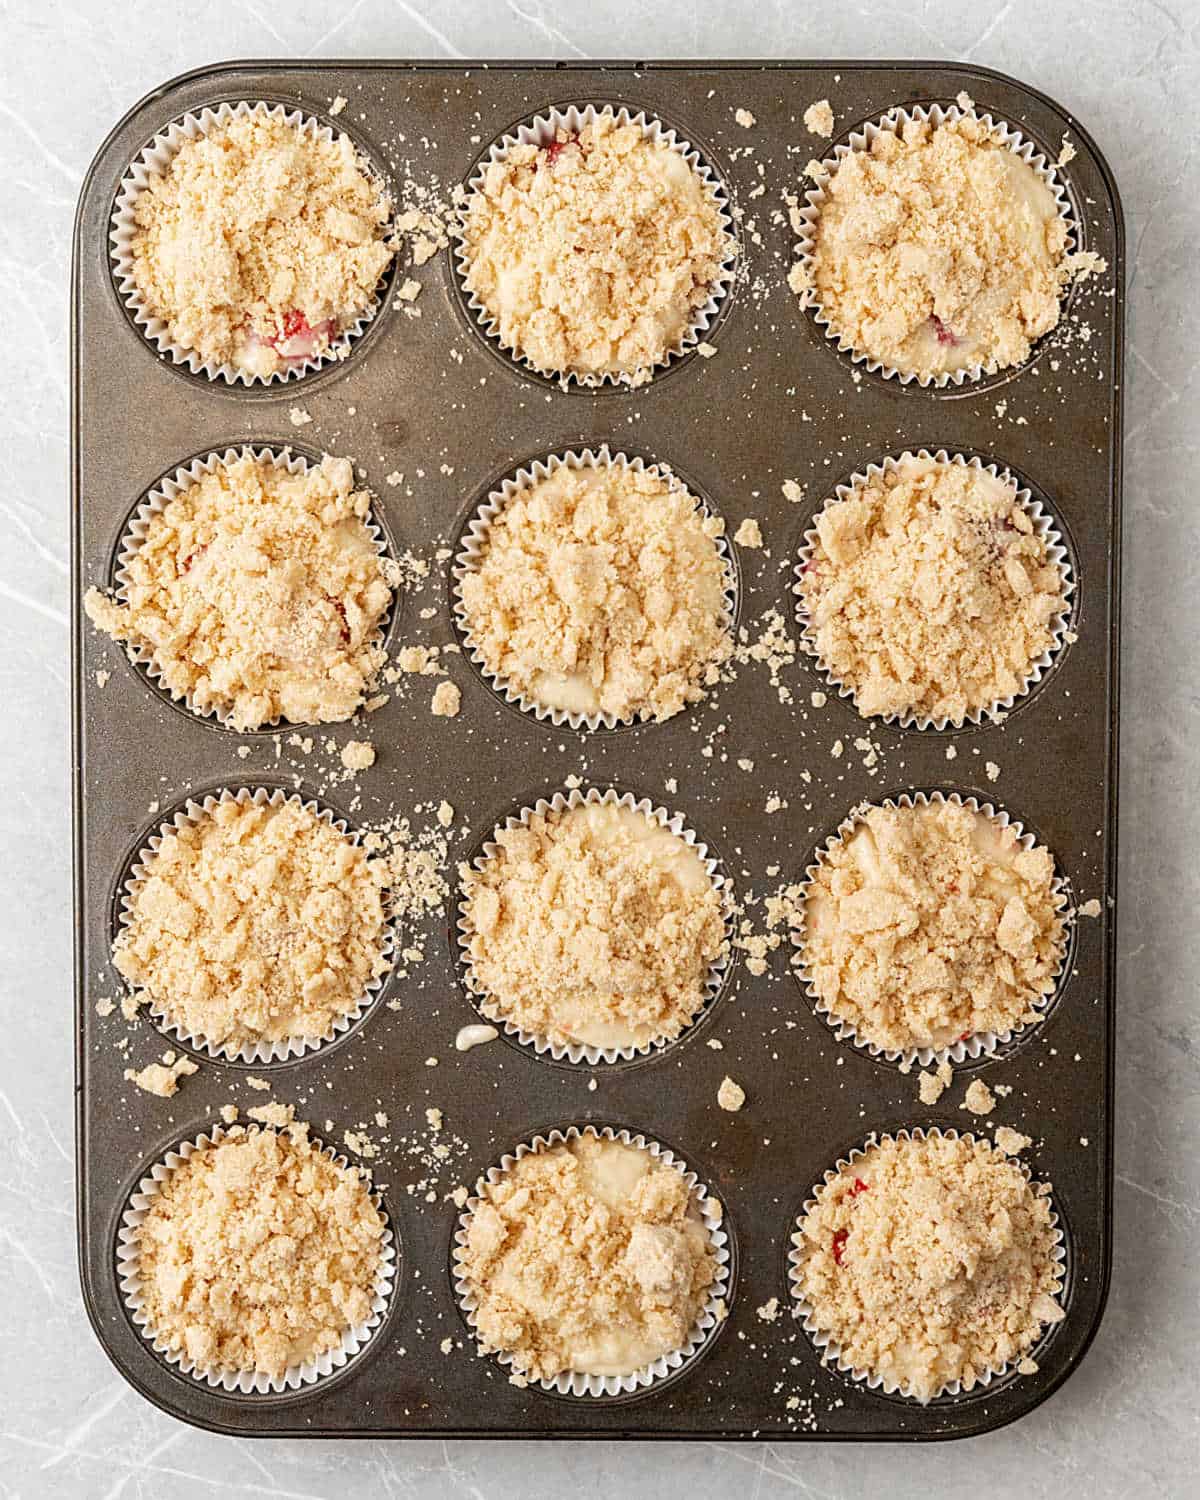 Crumb muffins in a muffin pan before baking. Light grey surface.